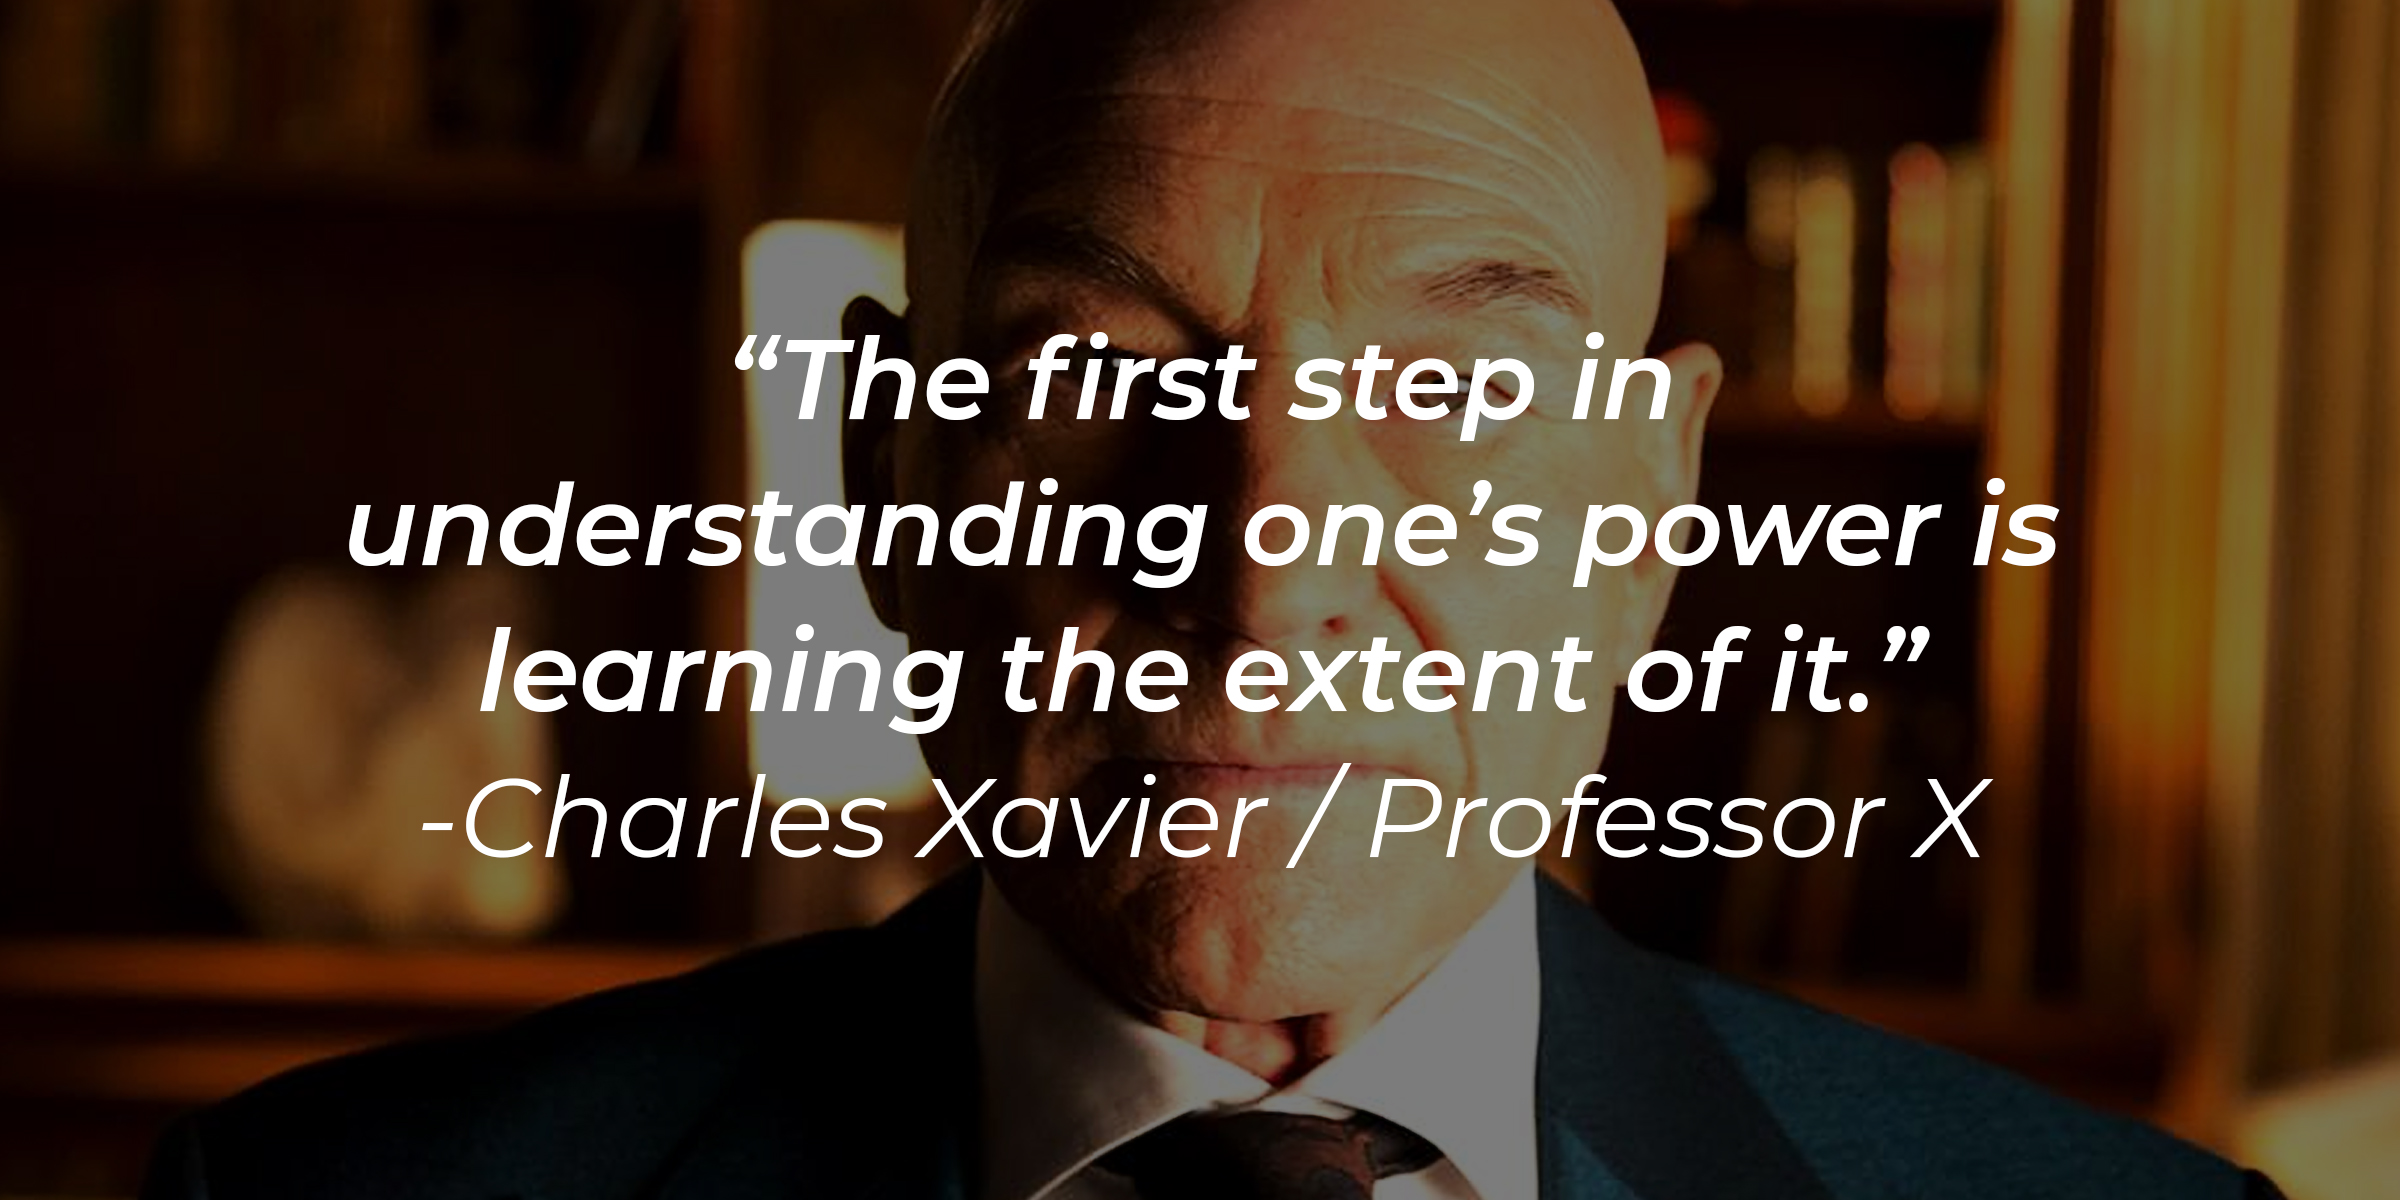 An image of Charles Xavier / Professor X, with his quote: "The first step in understanding one’s power is learning the extent of it." | Source: Facebook.com/xmenmovies